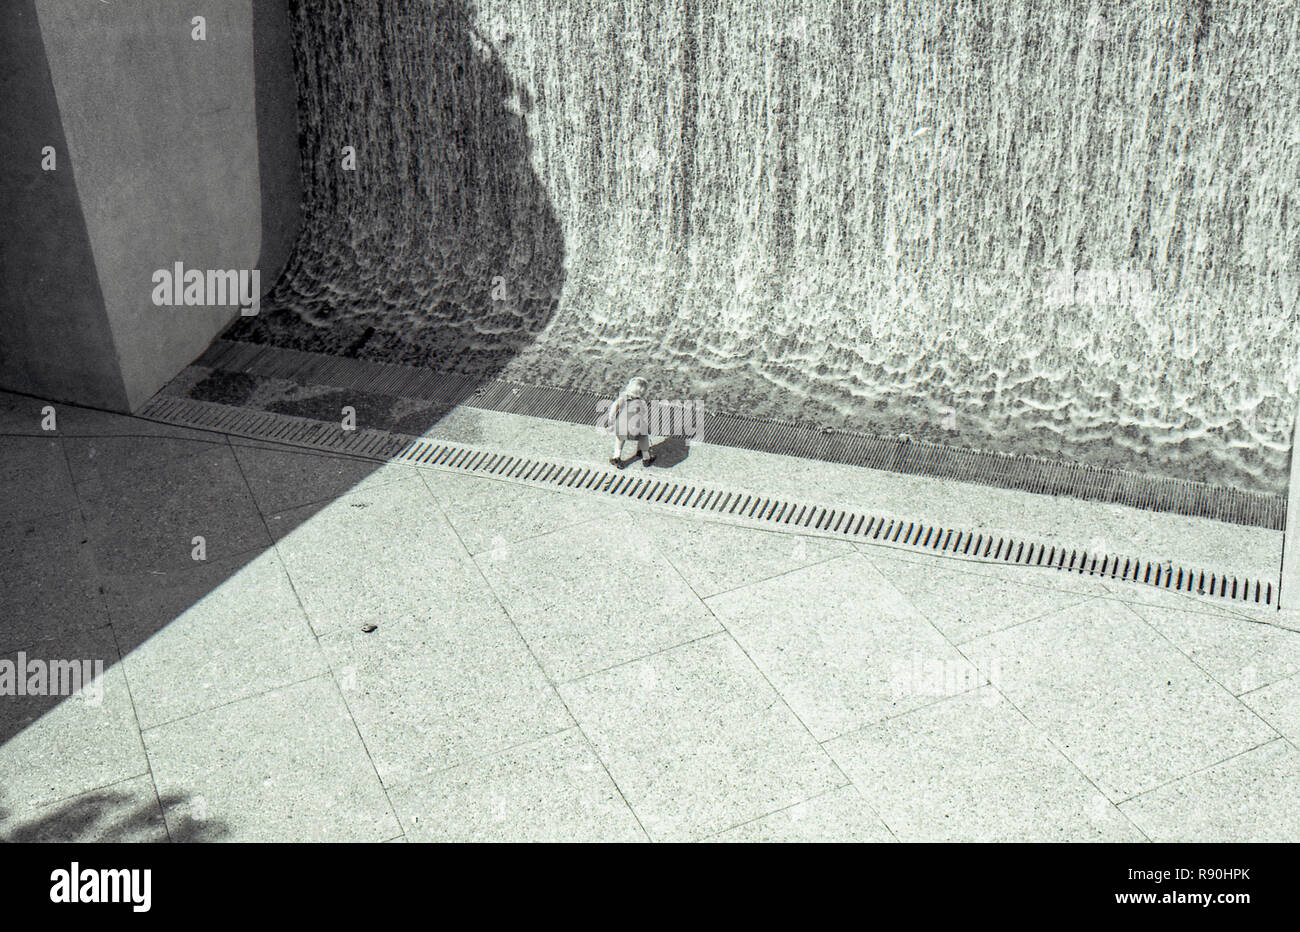 Sydney Australia, March 13th 1977: A young girl plays at the base of the Sydney Square Waterfall designed as part of the greater Square plan by Ridley Smith. In July 1977 the word Eternity was embedded in the pavement at the base of the waterfall to commemorate the life of Arthur Stace. Ending with his death in July 1967 Arthur Stace wrote a single word sermon Eternity in chalk on the pavements of Sydney in beautiful copper place writing for 34 years. Stace was further remembered when the word Eternity was lit up on the Sydney Harbour Bridge as part of the year 2000 New Years Eve celebrations. Stock Photo